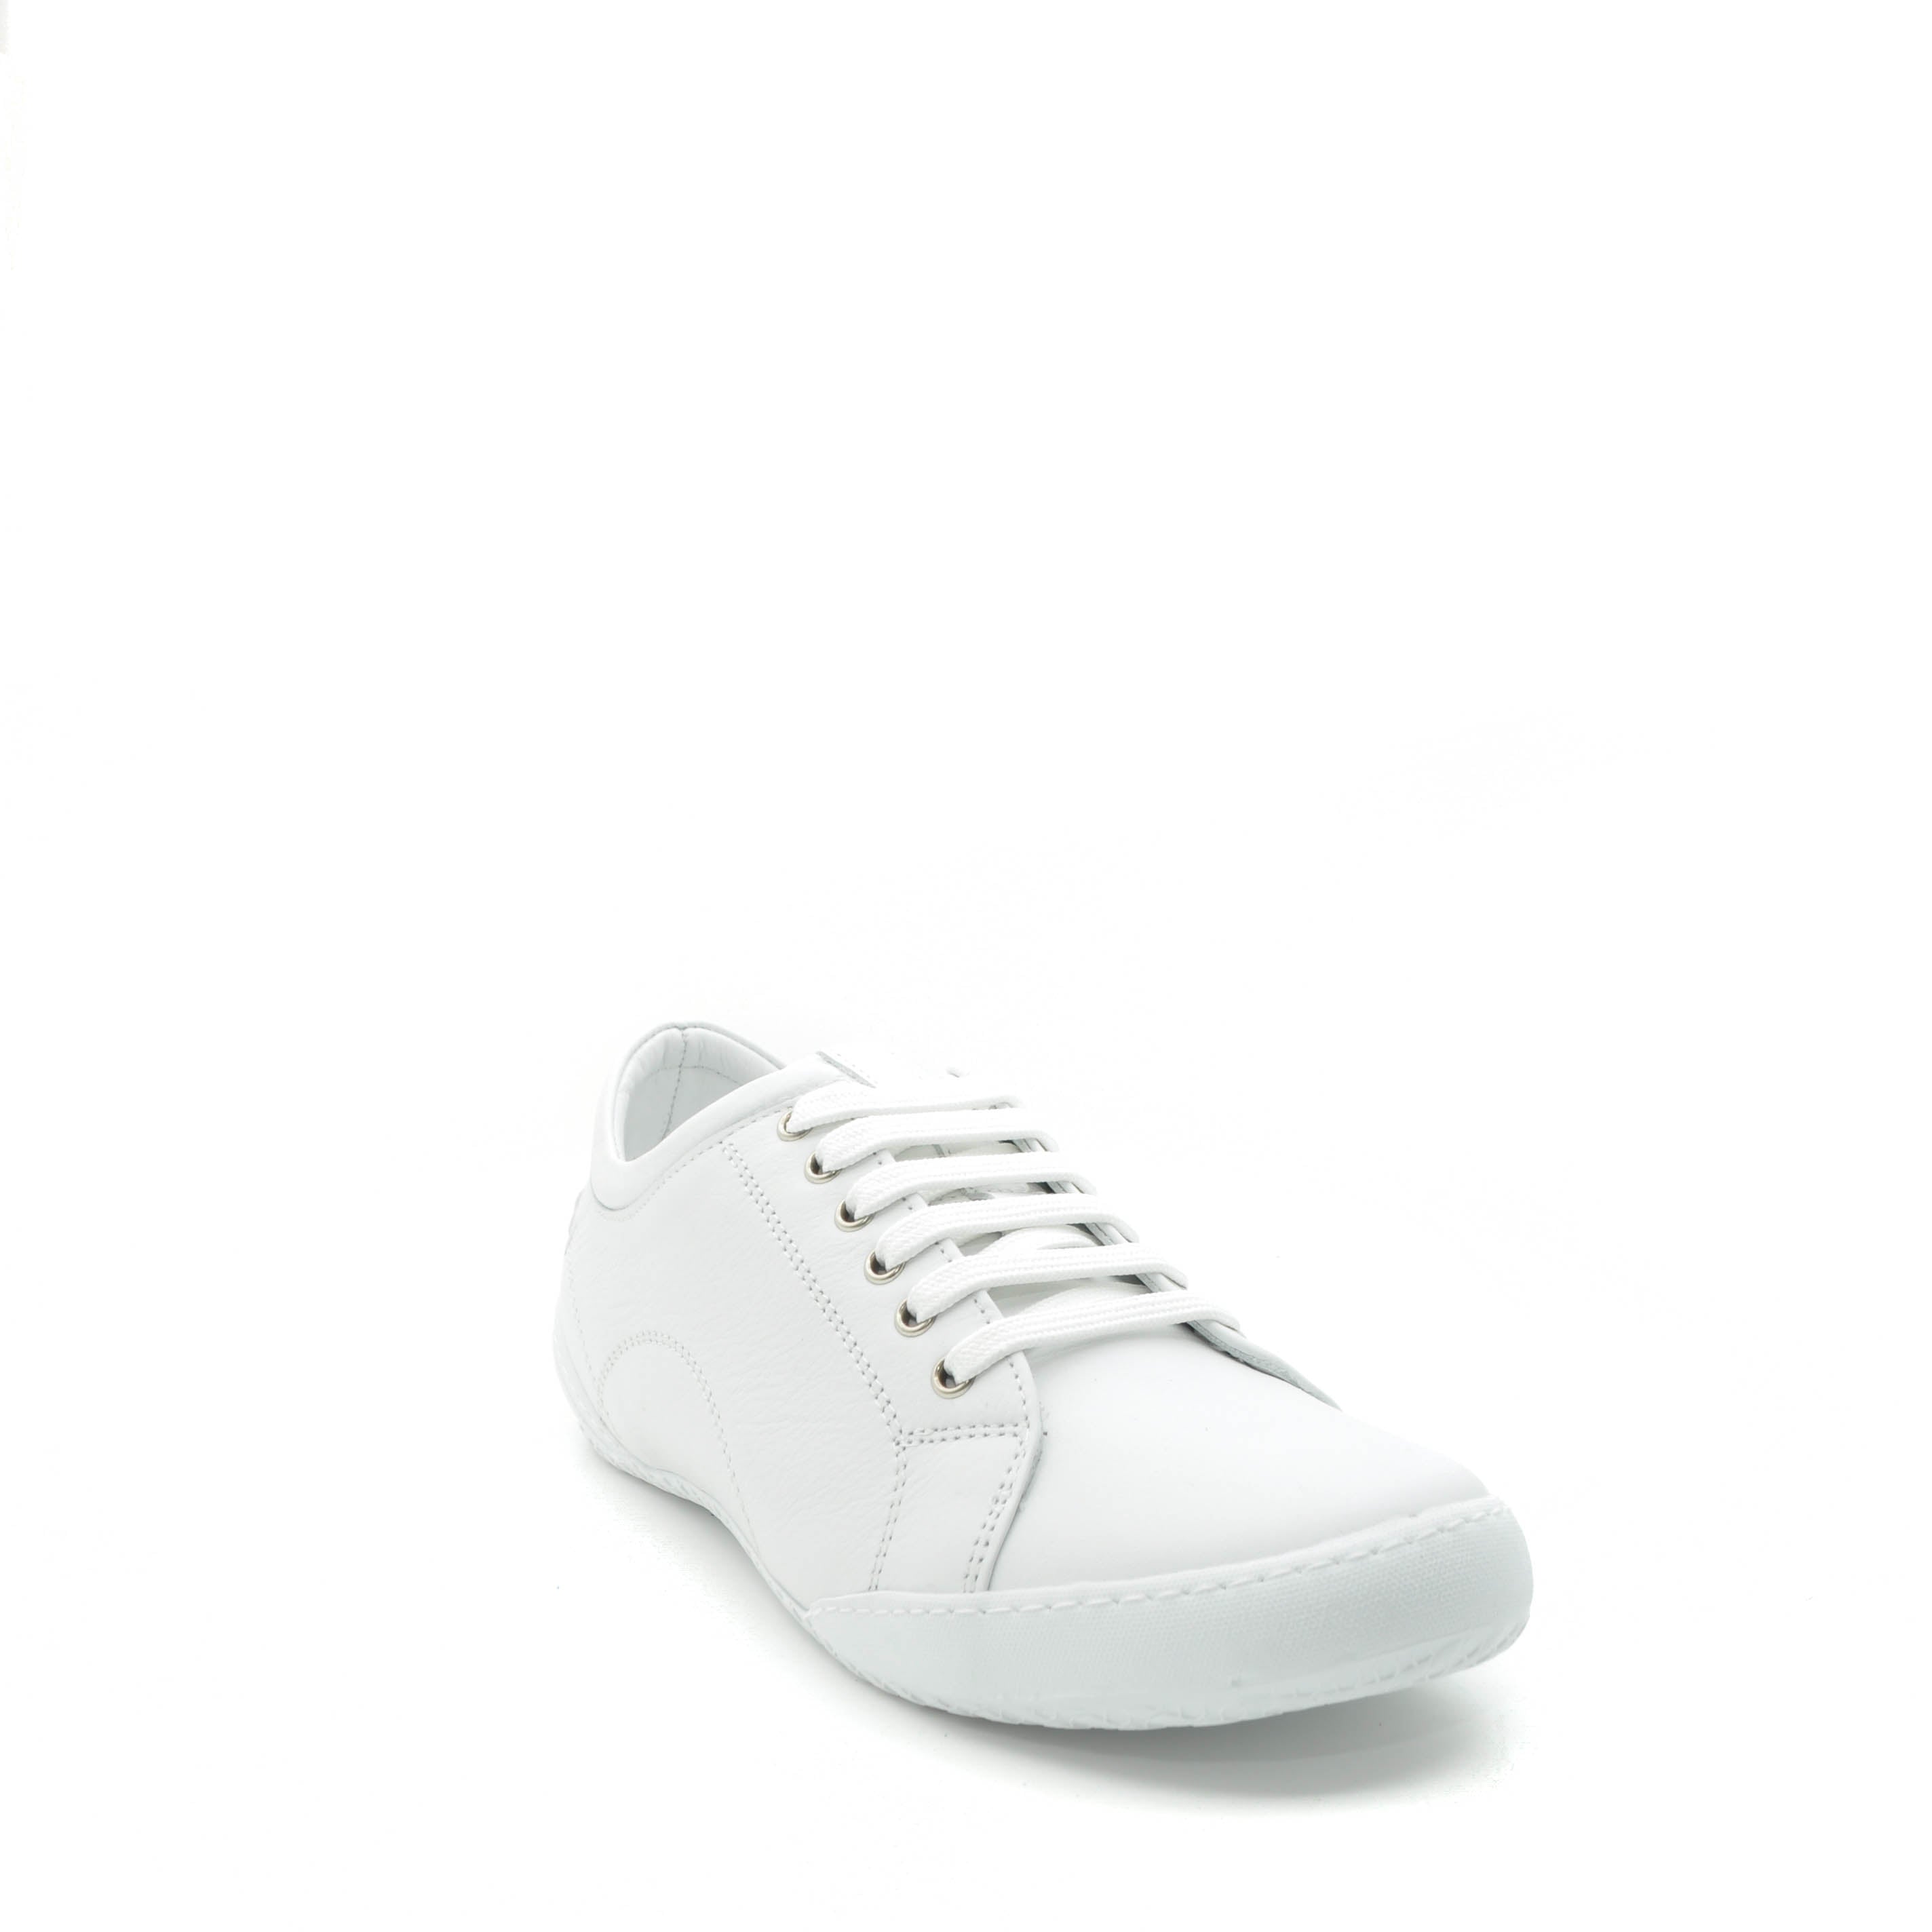 white shoes to wear with dresses